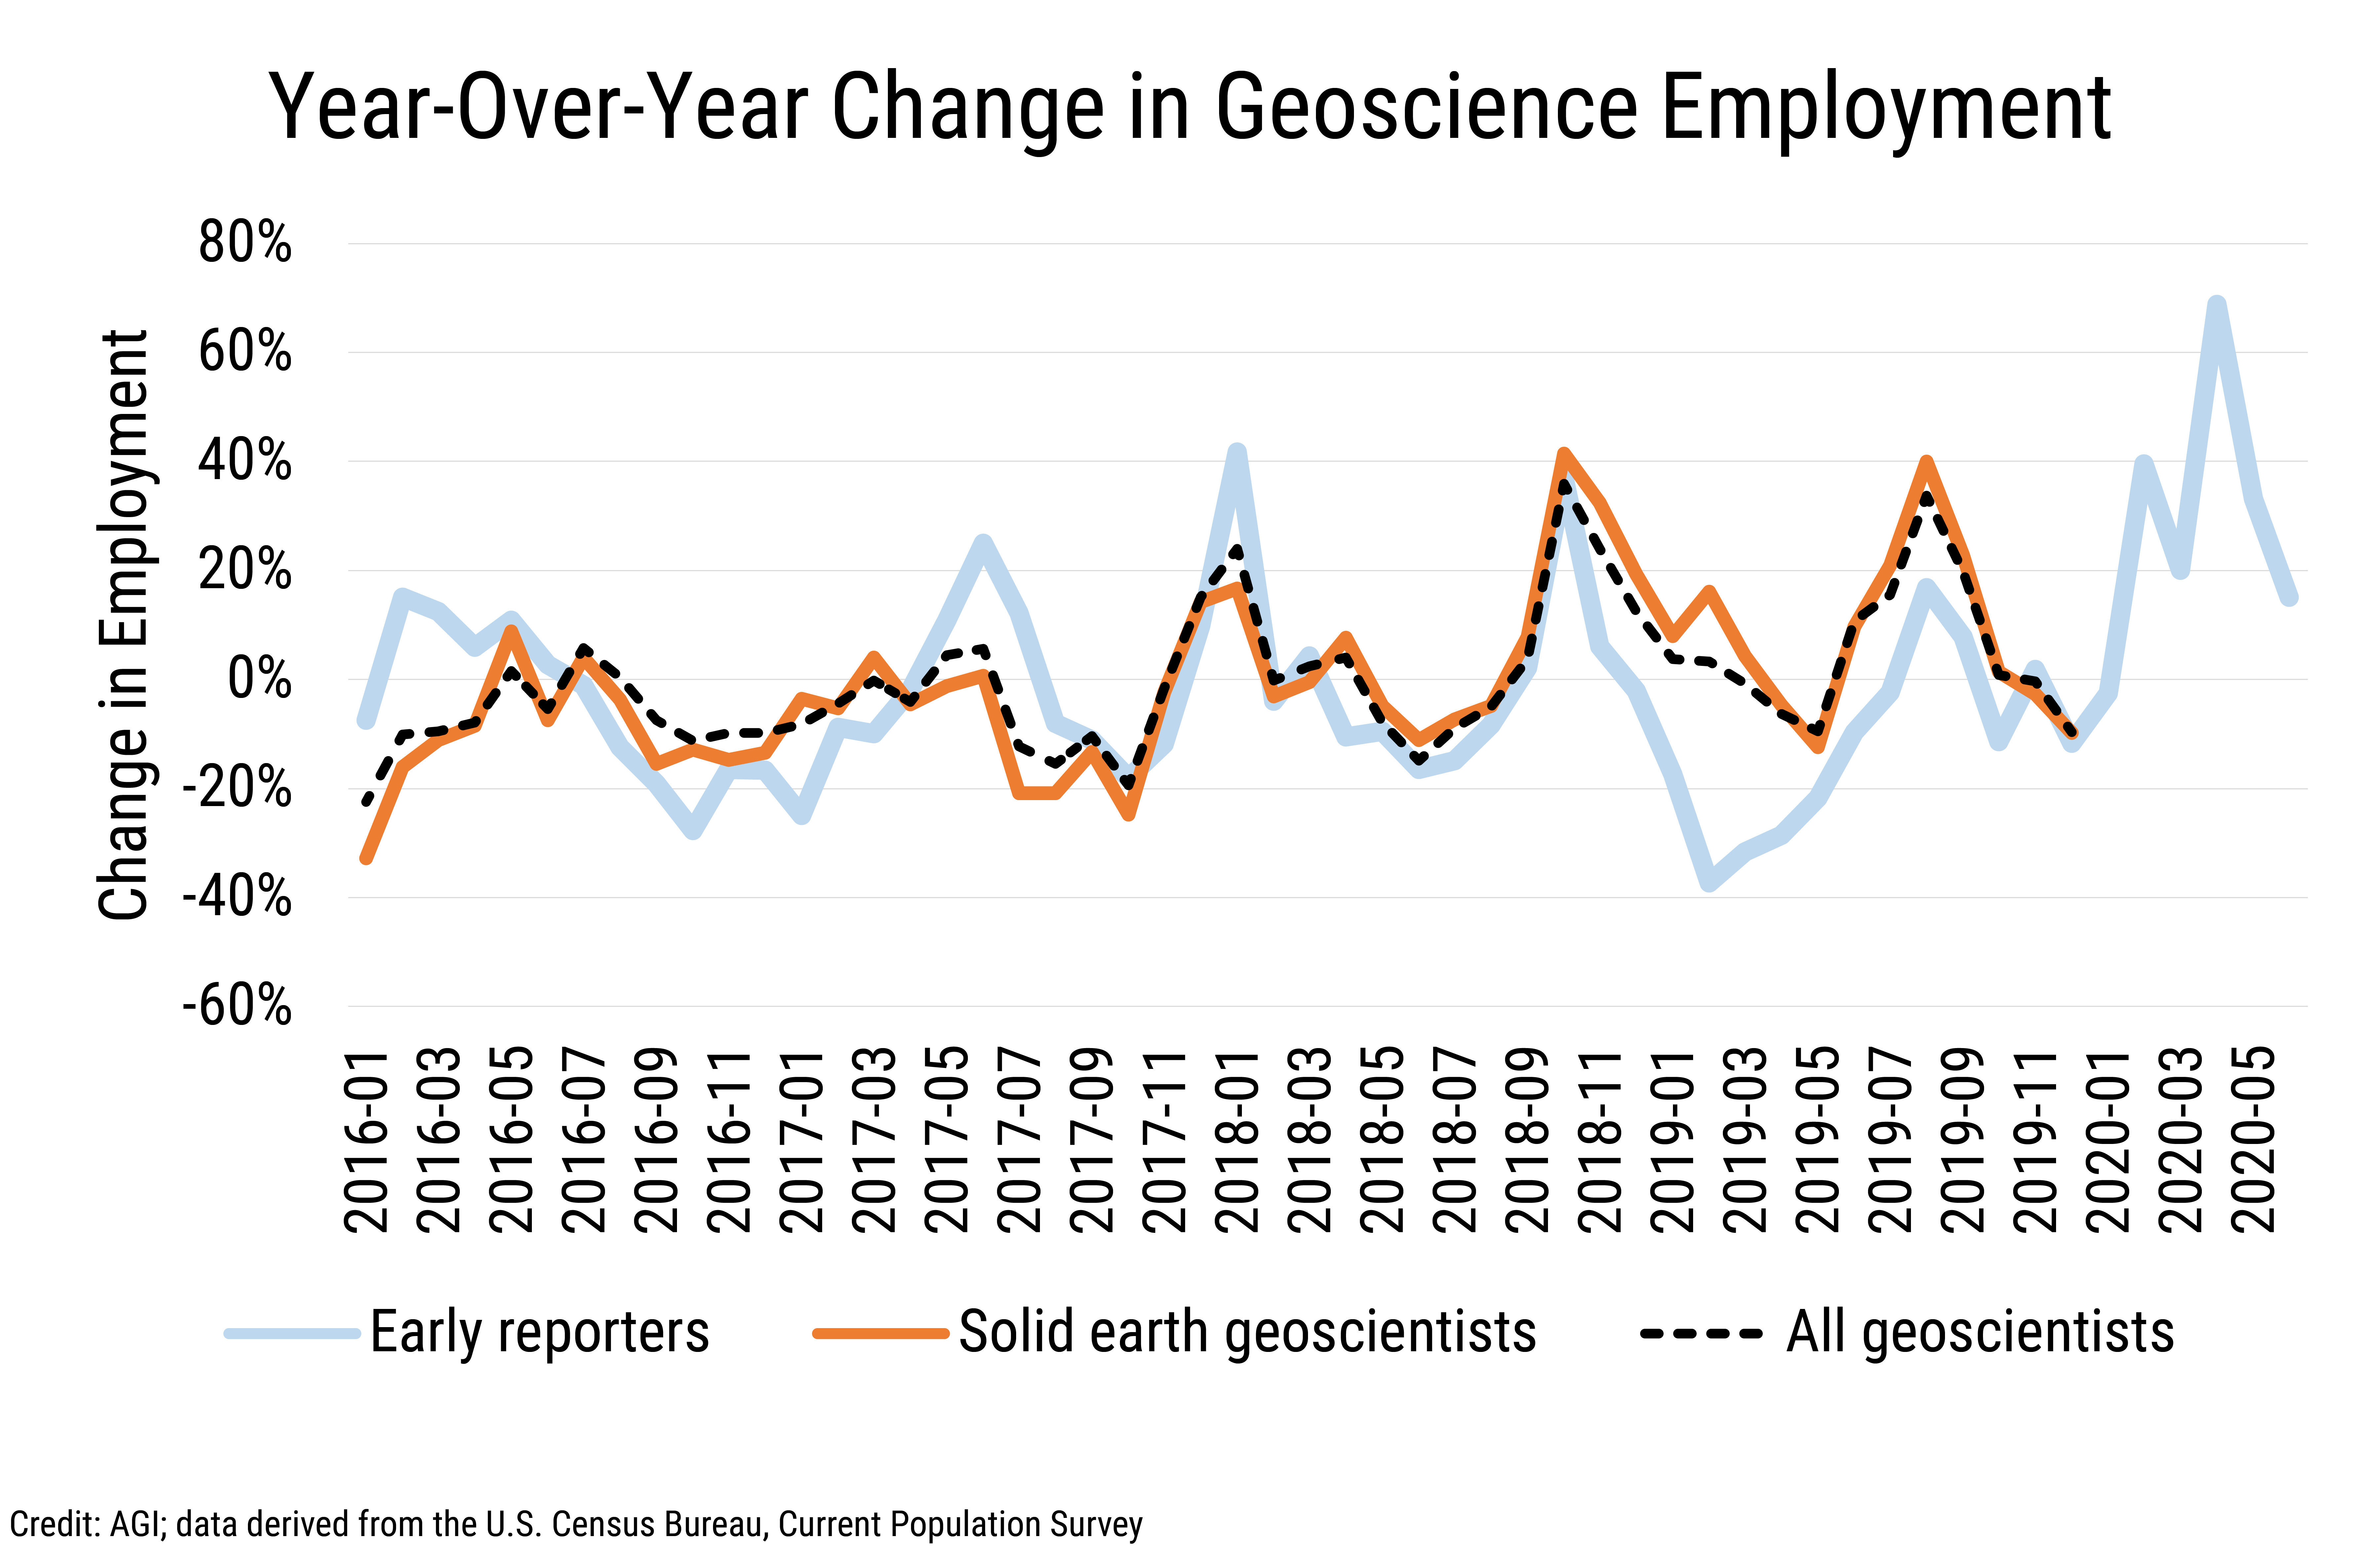 Data Brief 2020-013 chart-02: Year-Over-Year Change in Geoscience Employment (Credit: AGI, data derived from the U.S. Census Bureau, Current Population Survey)